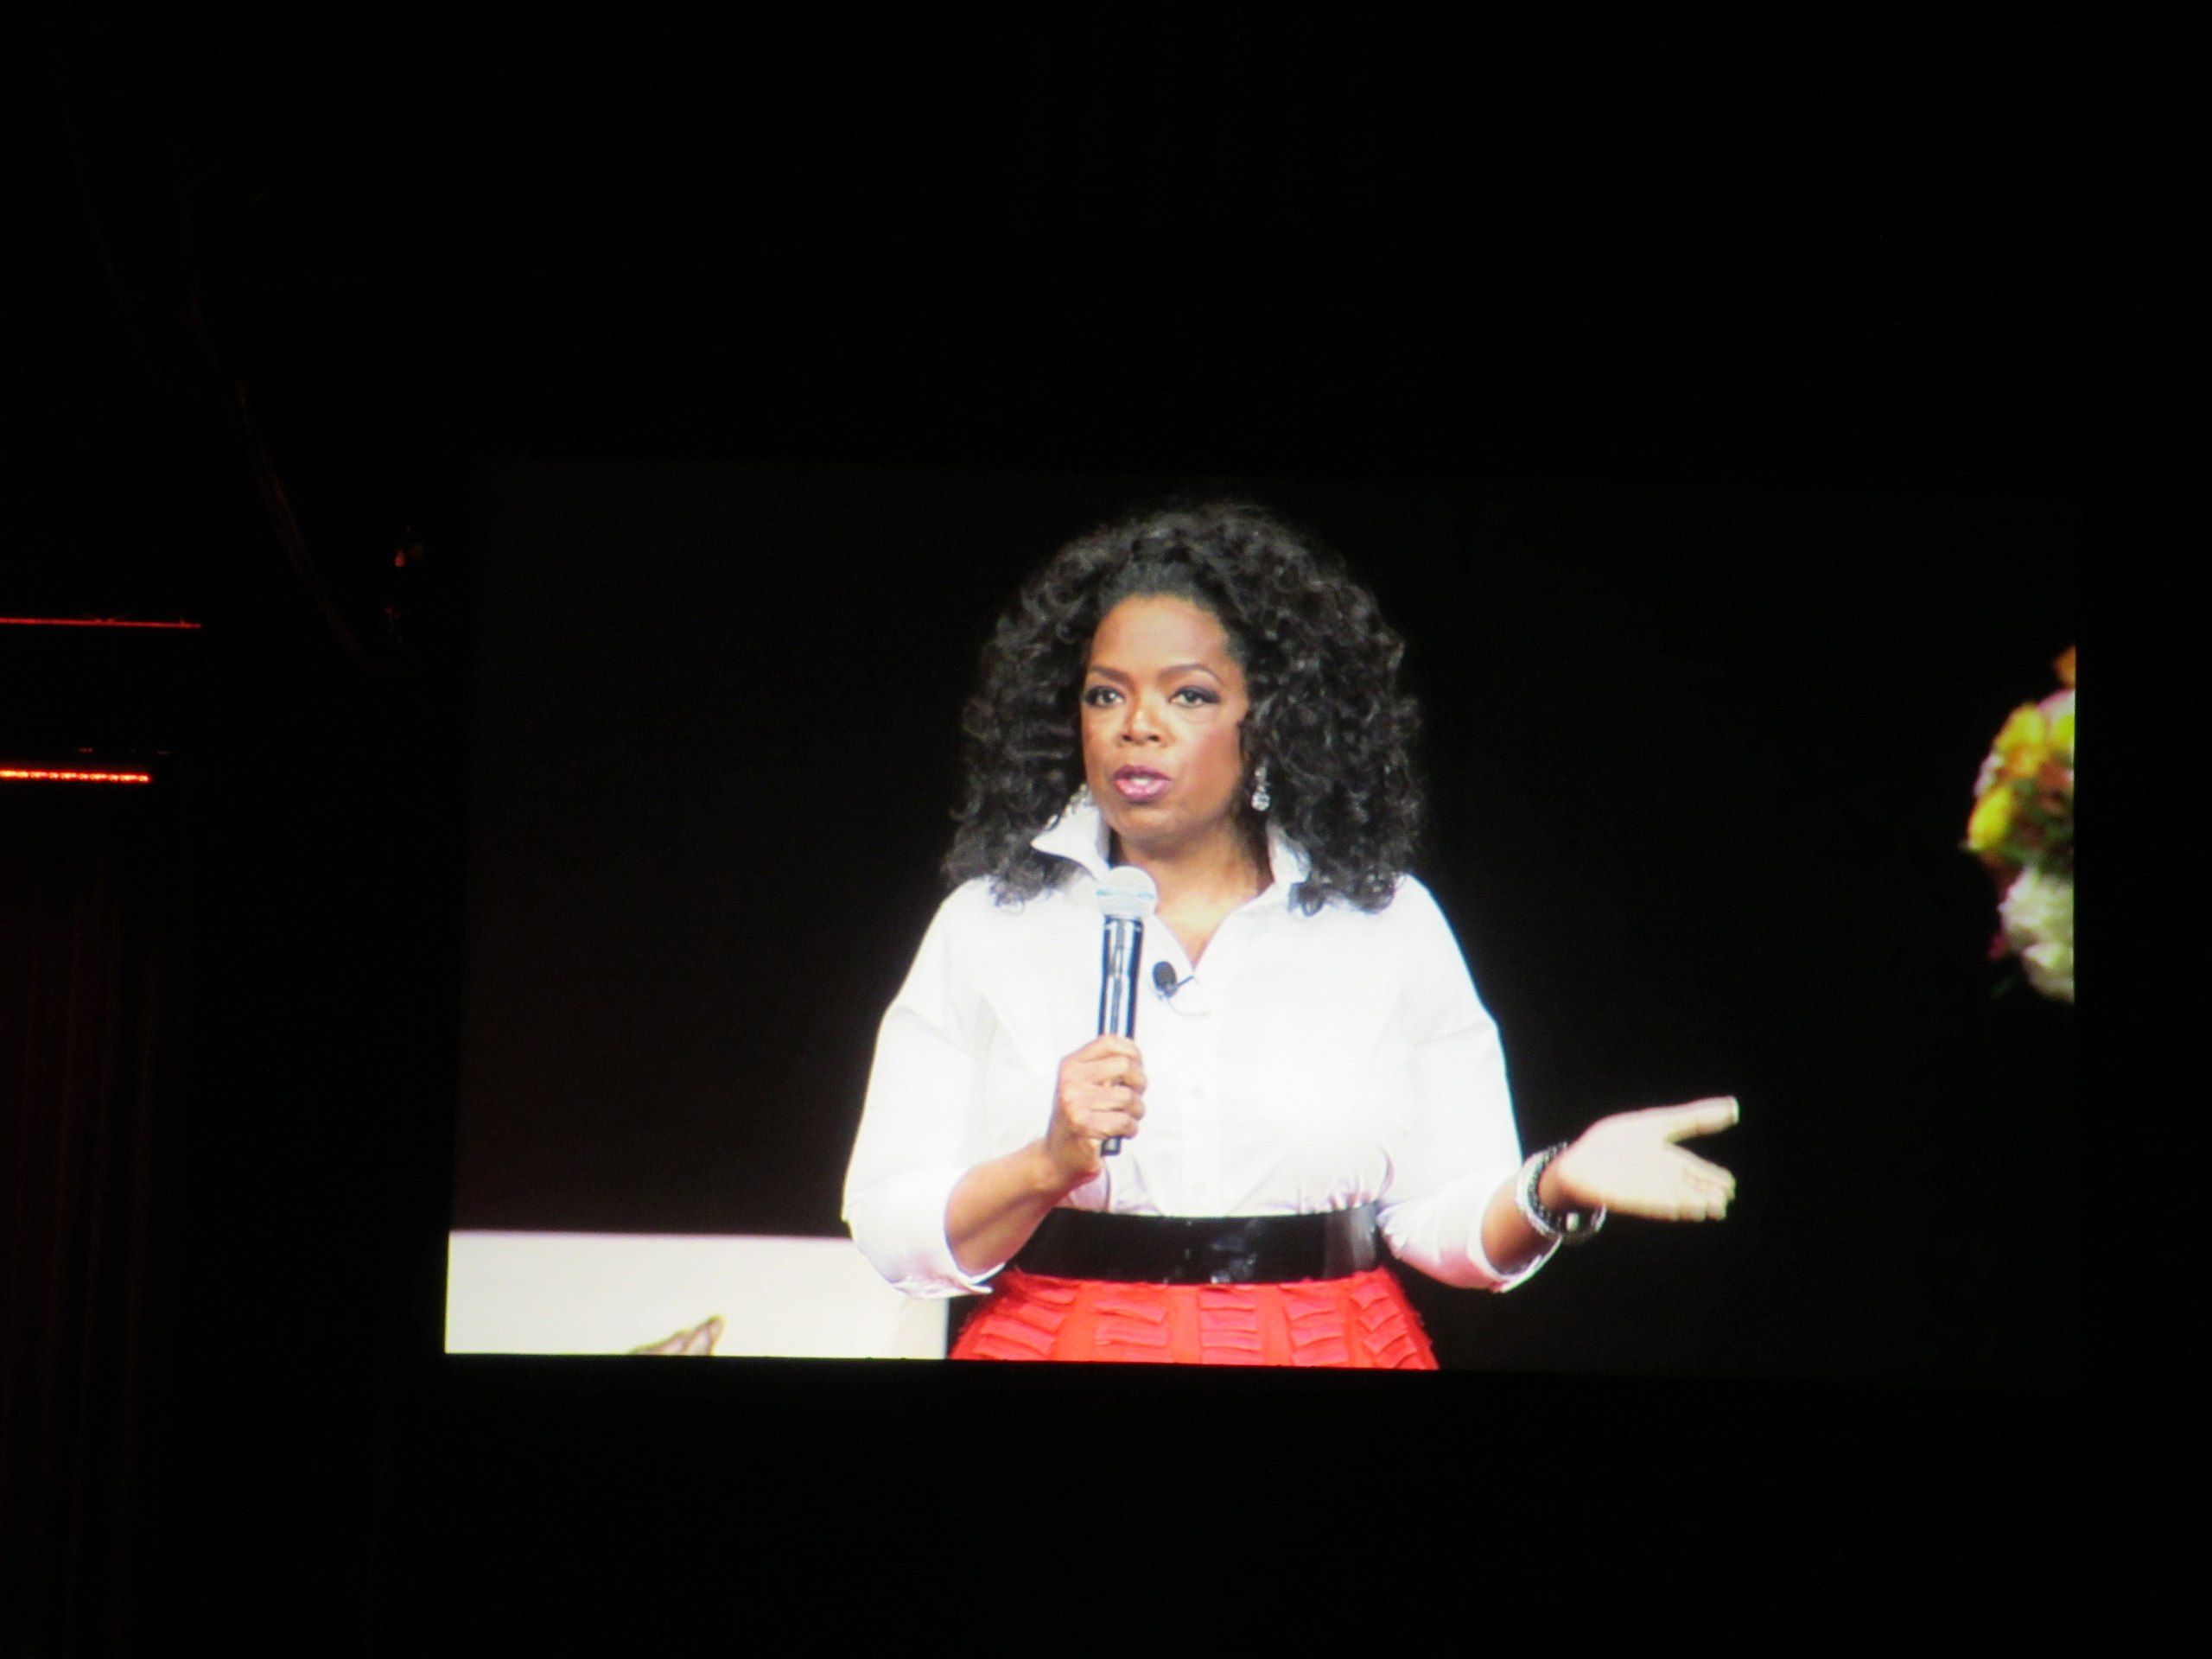 Oprah Winfrey speaking with a microphone in hand.